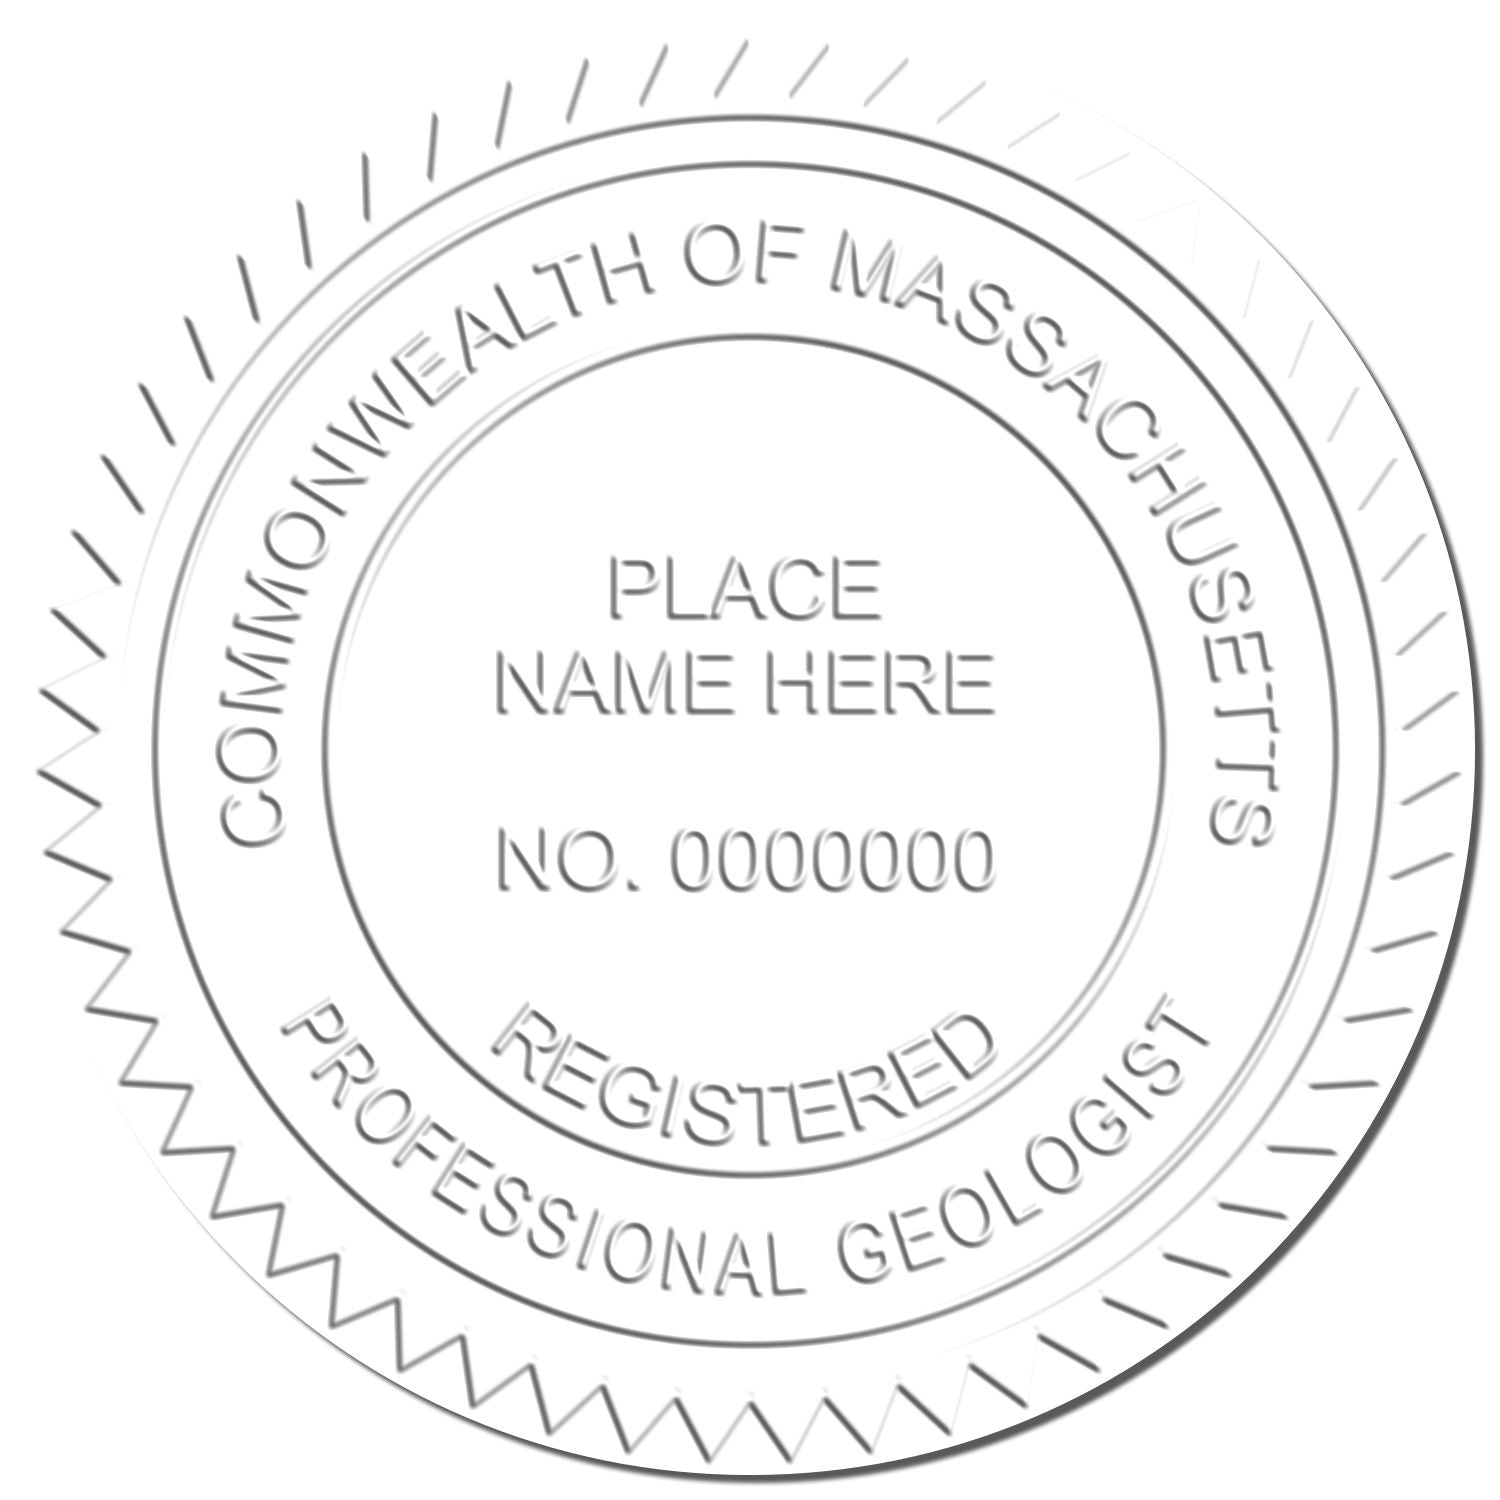 A photograph of the Hybrid Massachusetts Geologist Seal stamp impression reveals a vivid, professional image of the on paper.